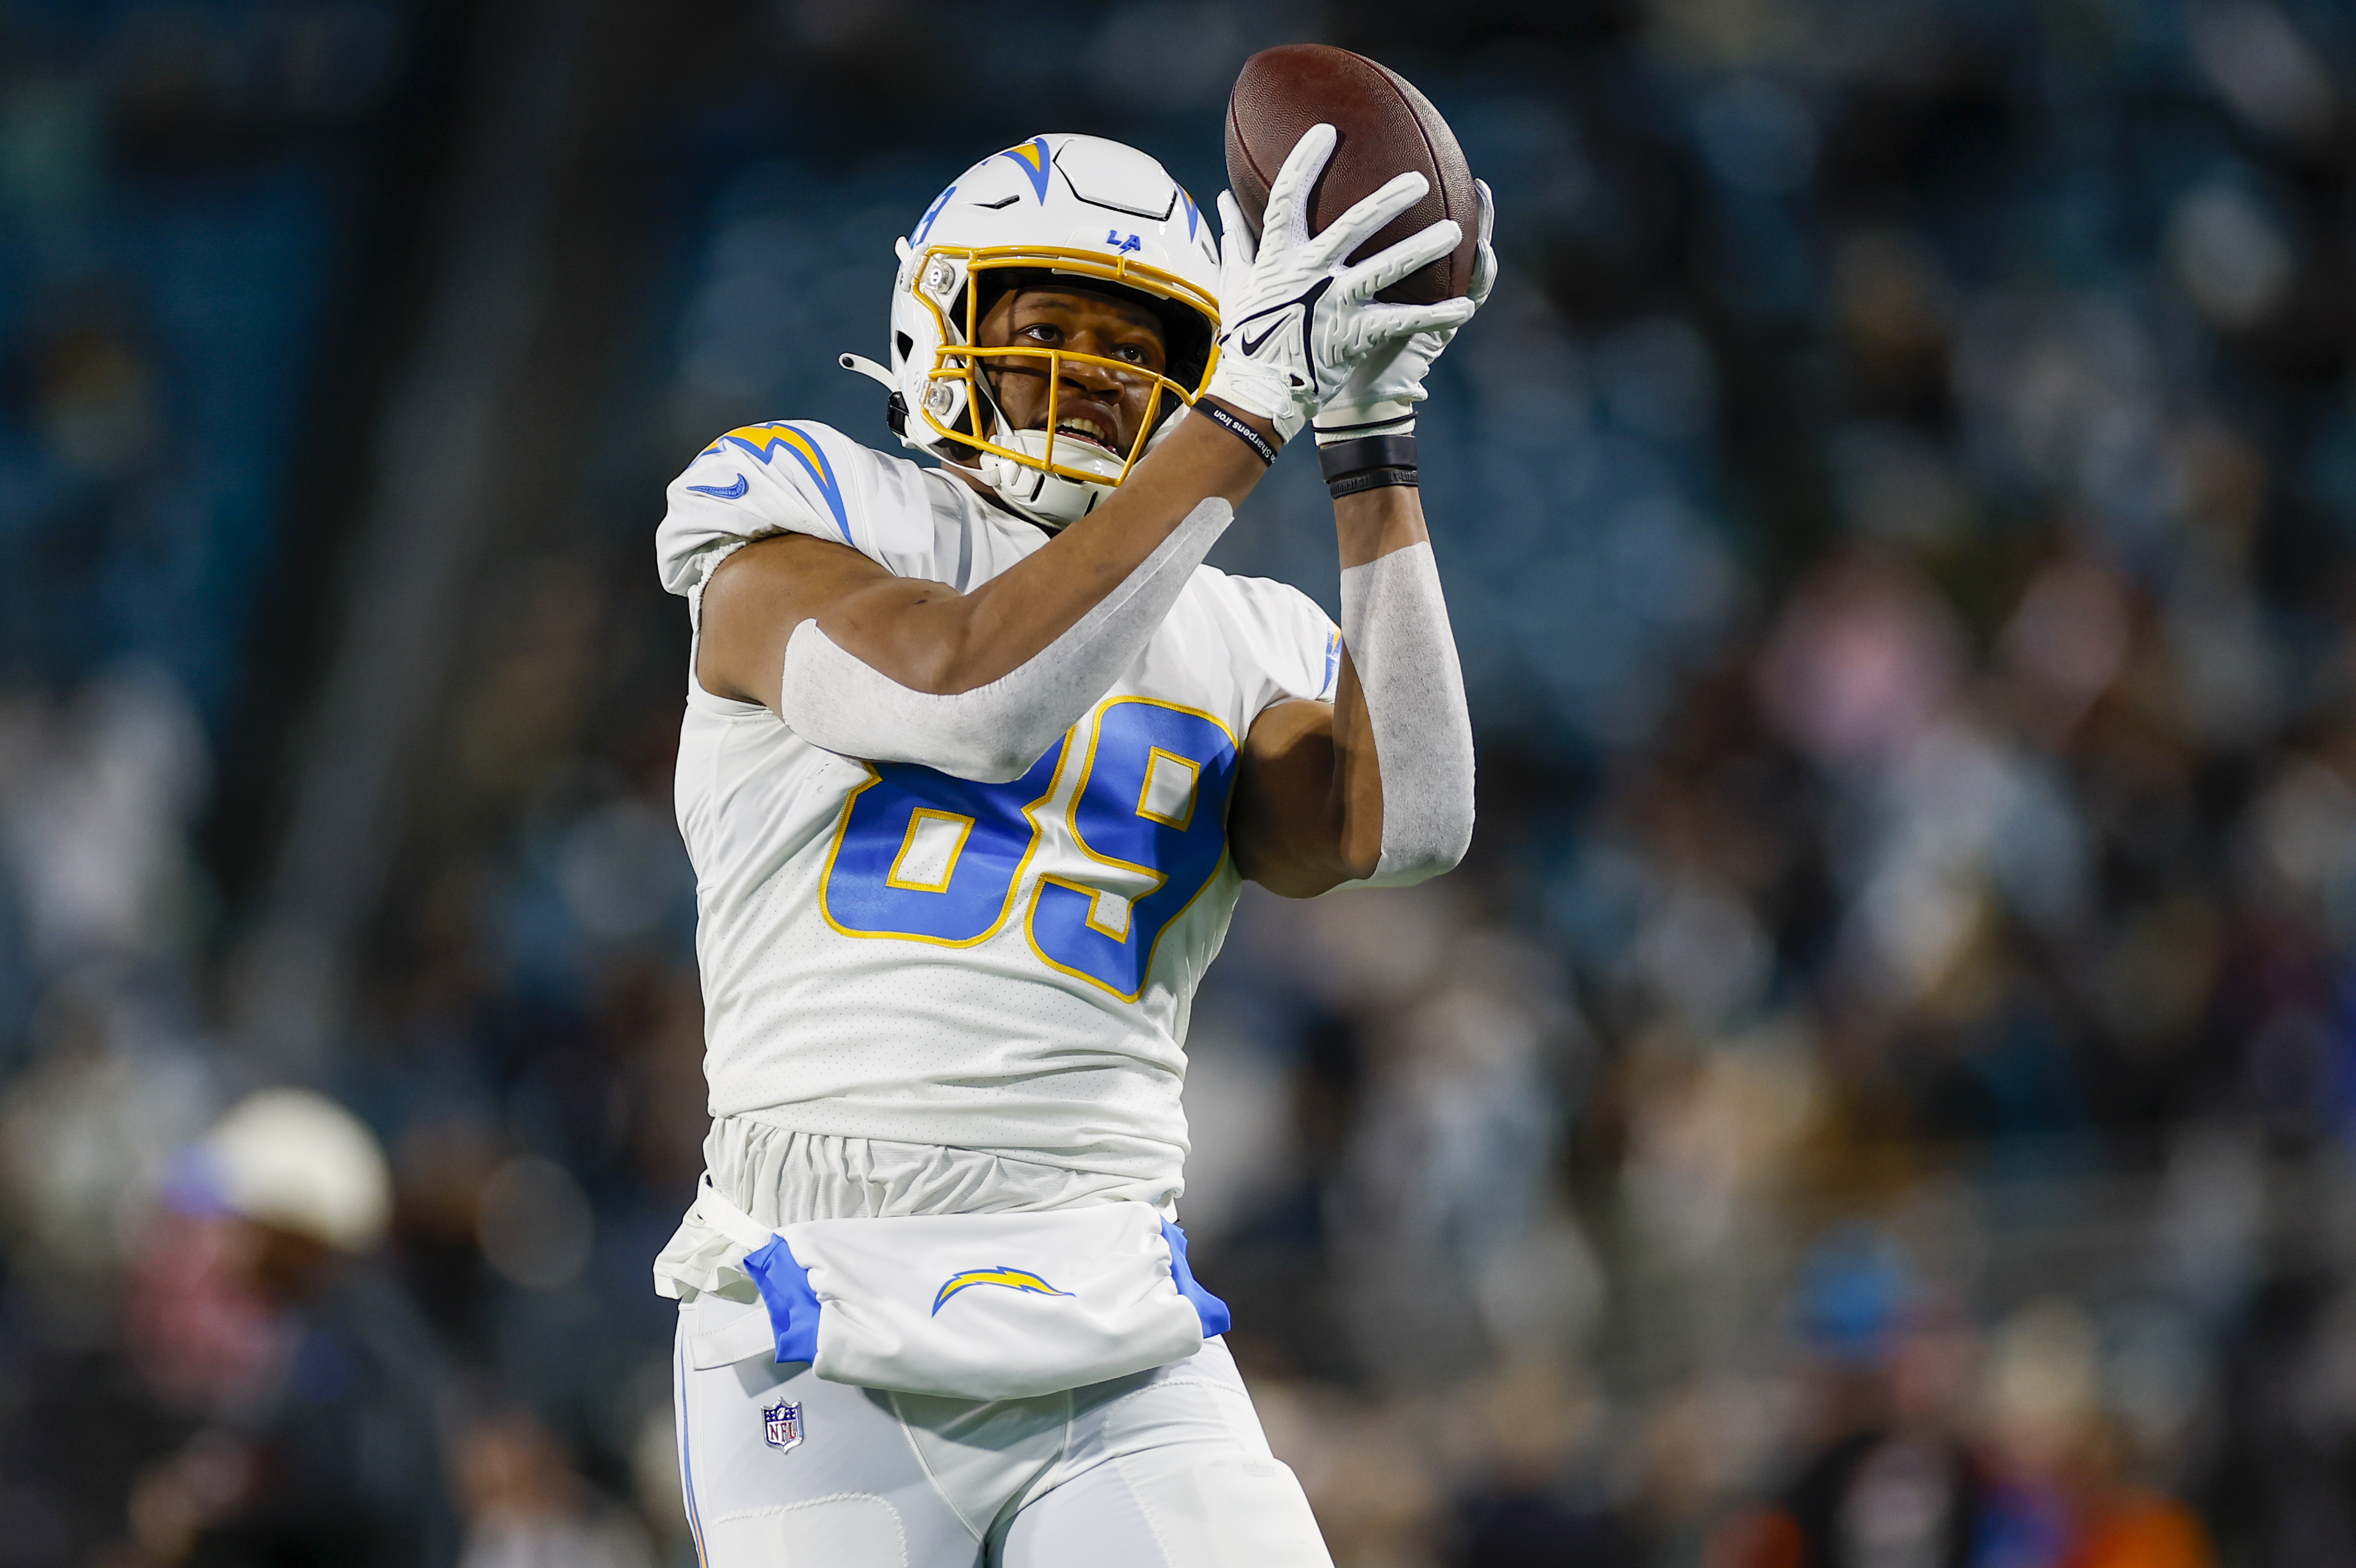 NFL: JAN 14 AFC Wild Card Playoffs - Chargers at Jaguars